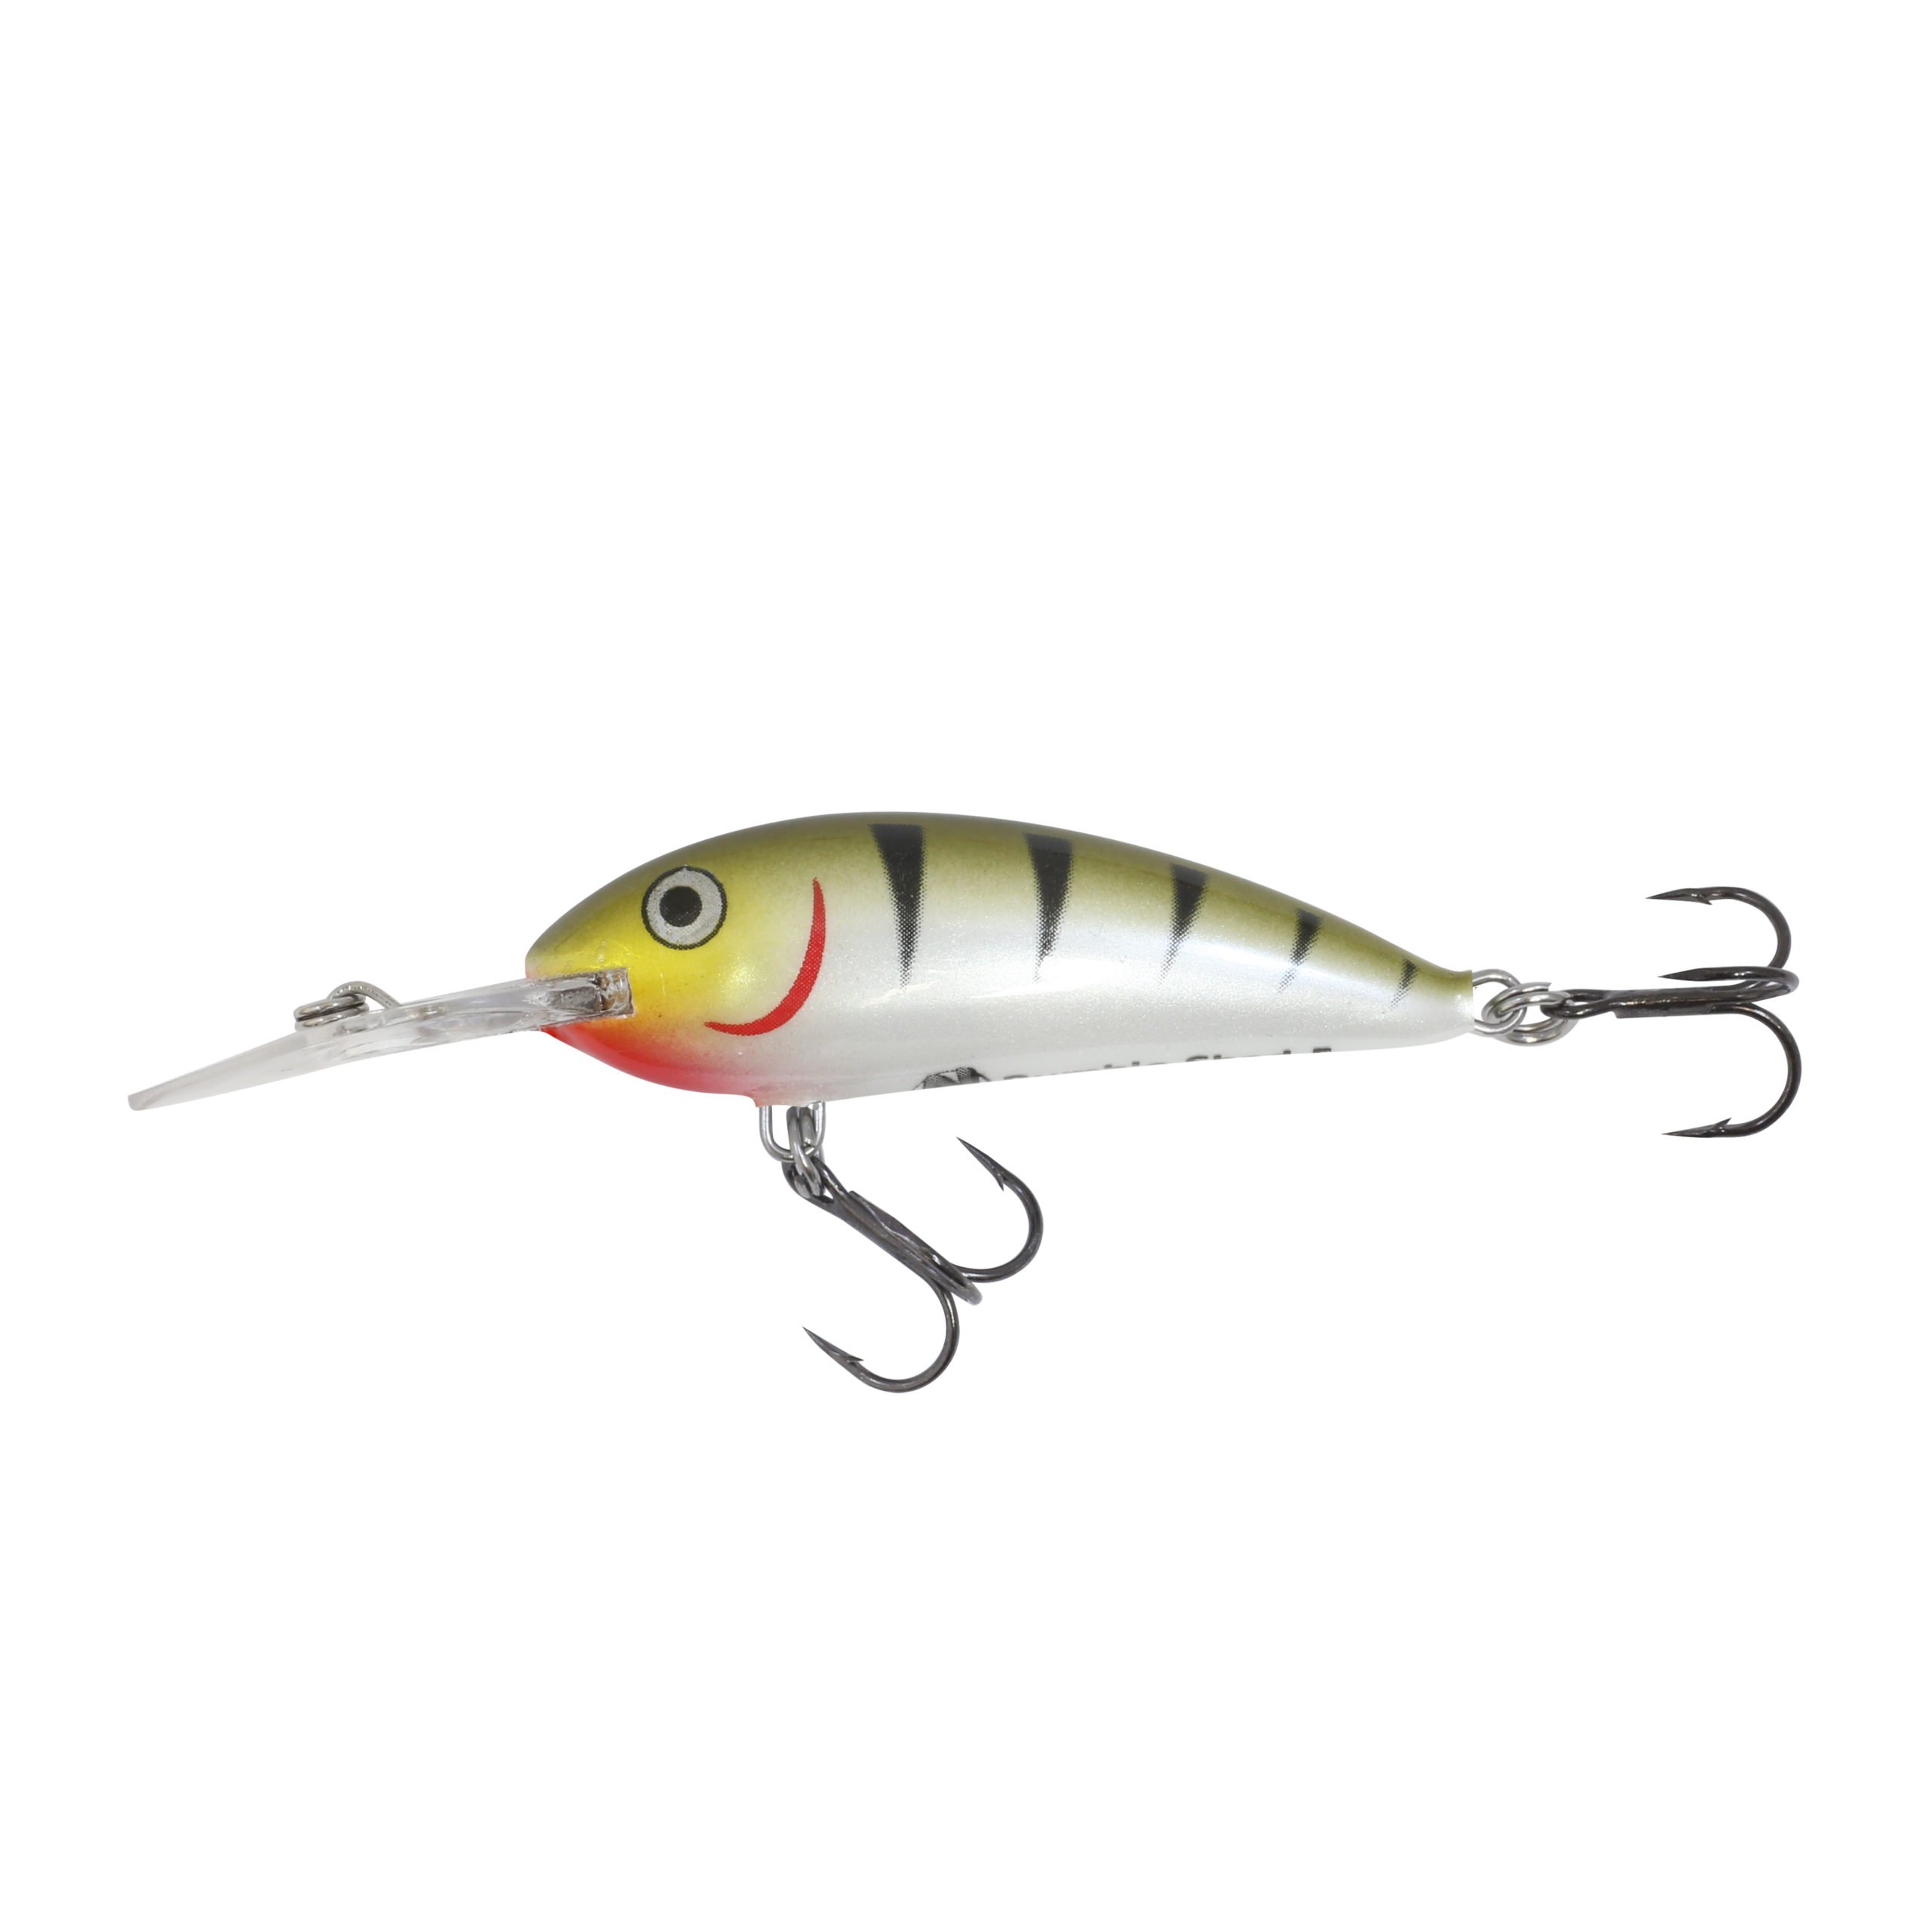 The Rumble Shad is Ready to Rumble